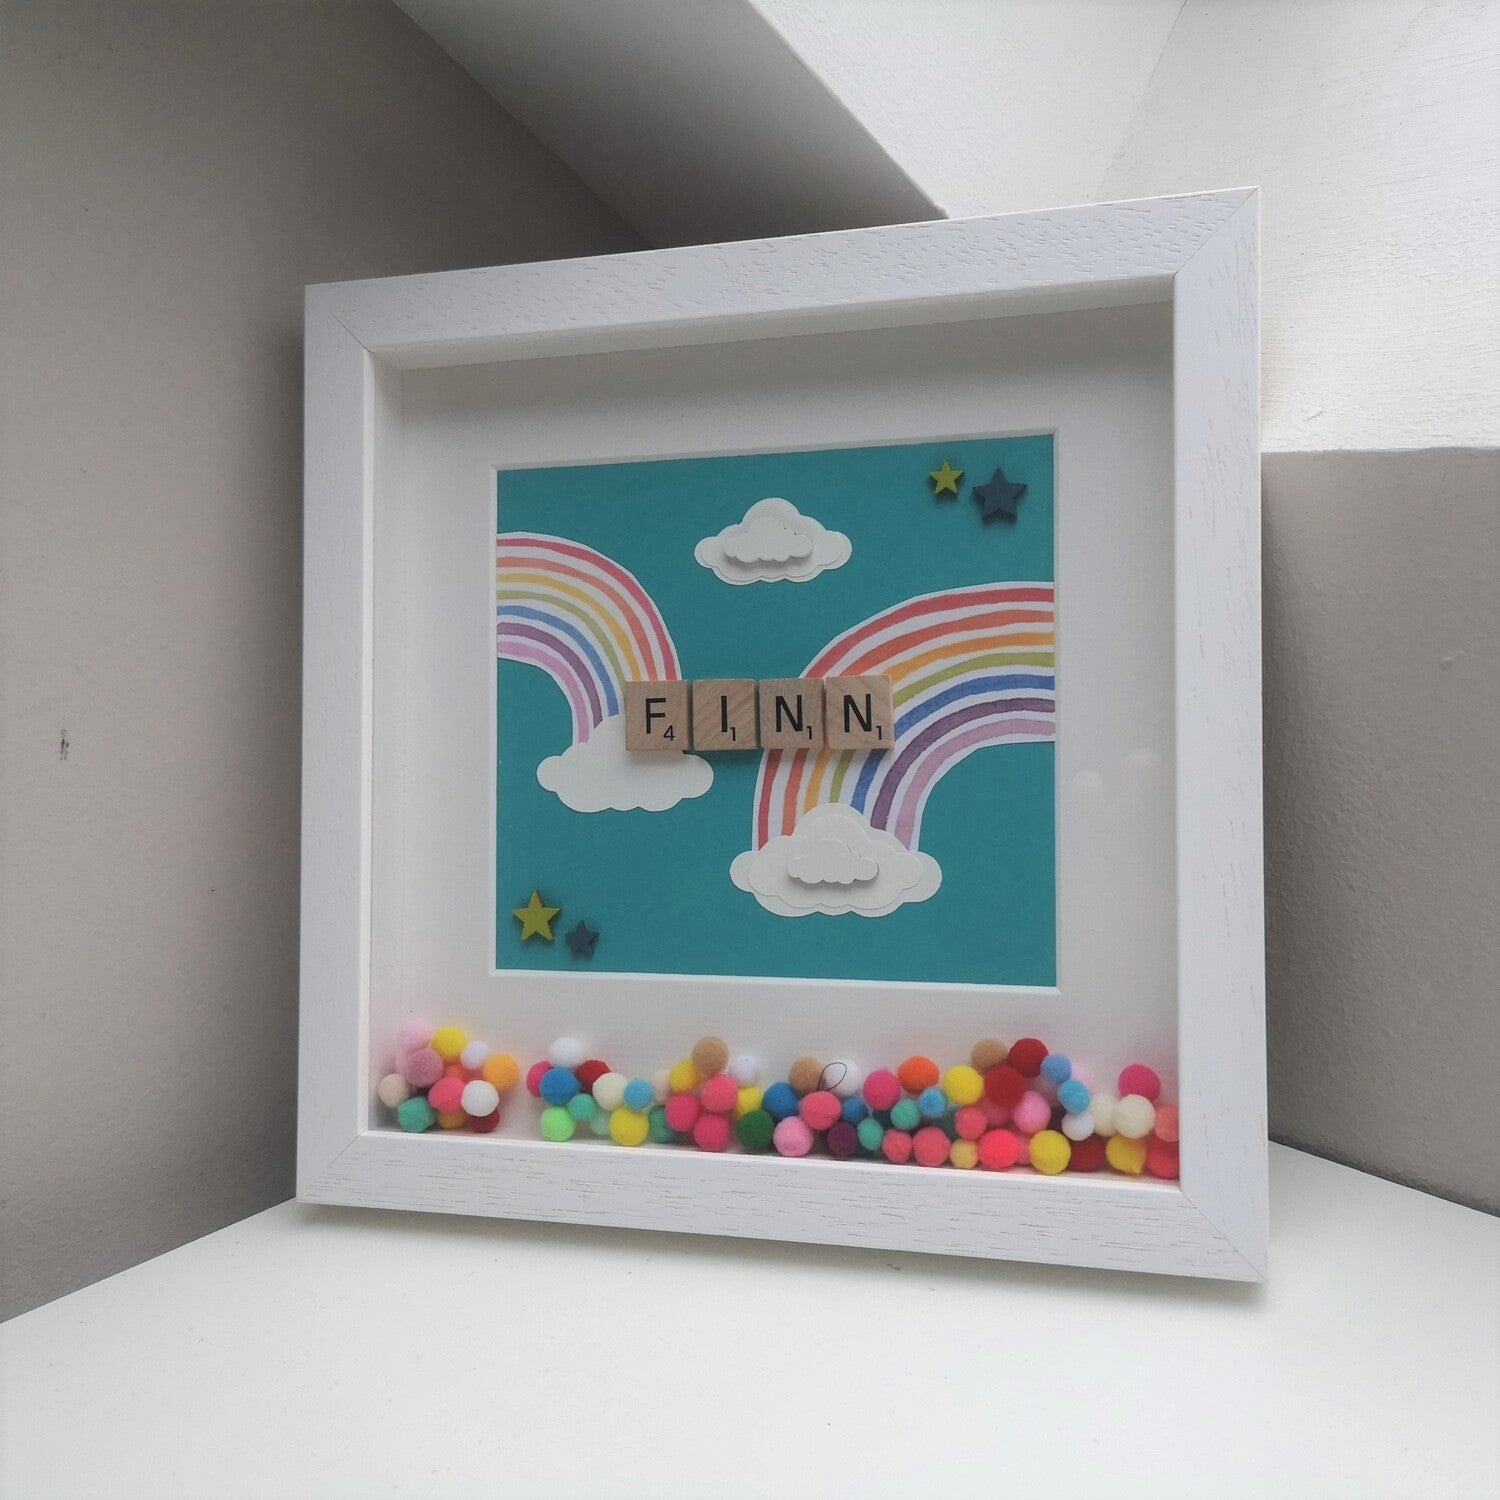 A name in wooden tiles on a  teal background with Papercut Rainbows and clouds, bright coloured pompoms and wooden clouds in a handmade 25x25cm deep box wooden frame.